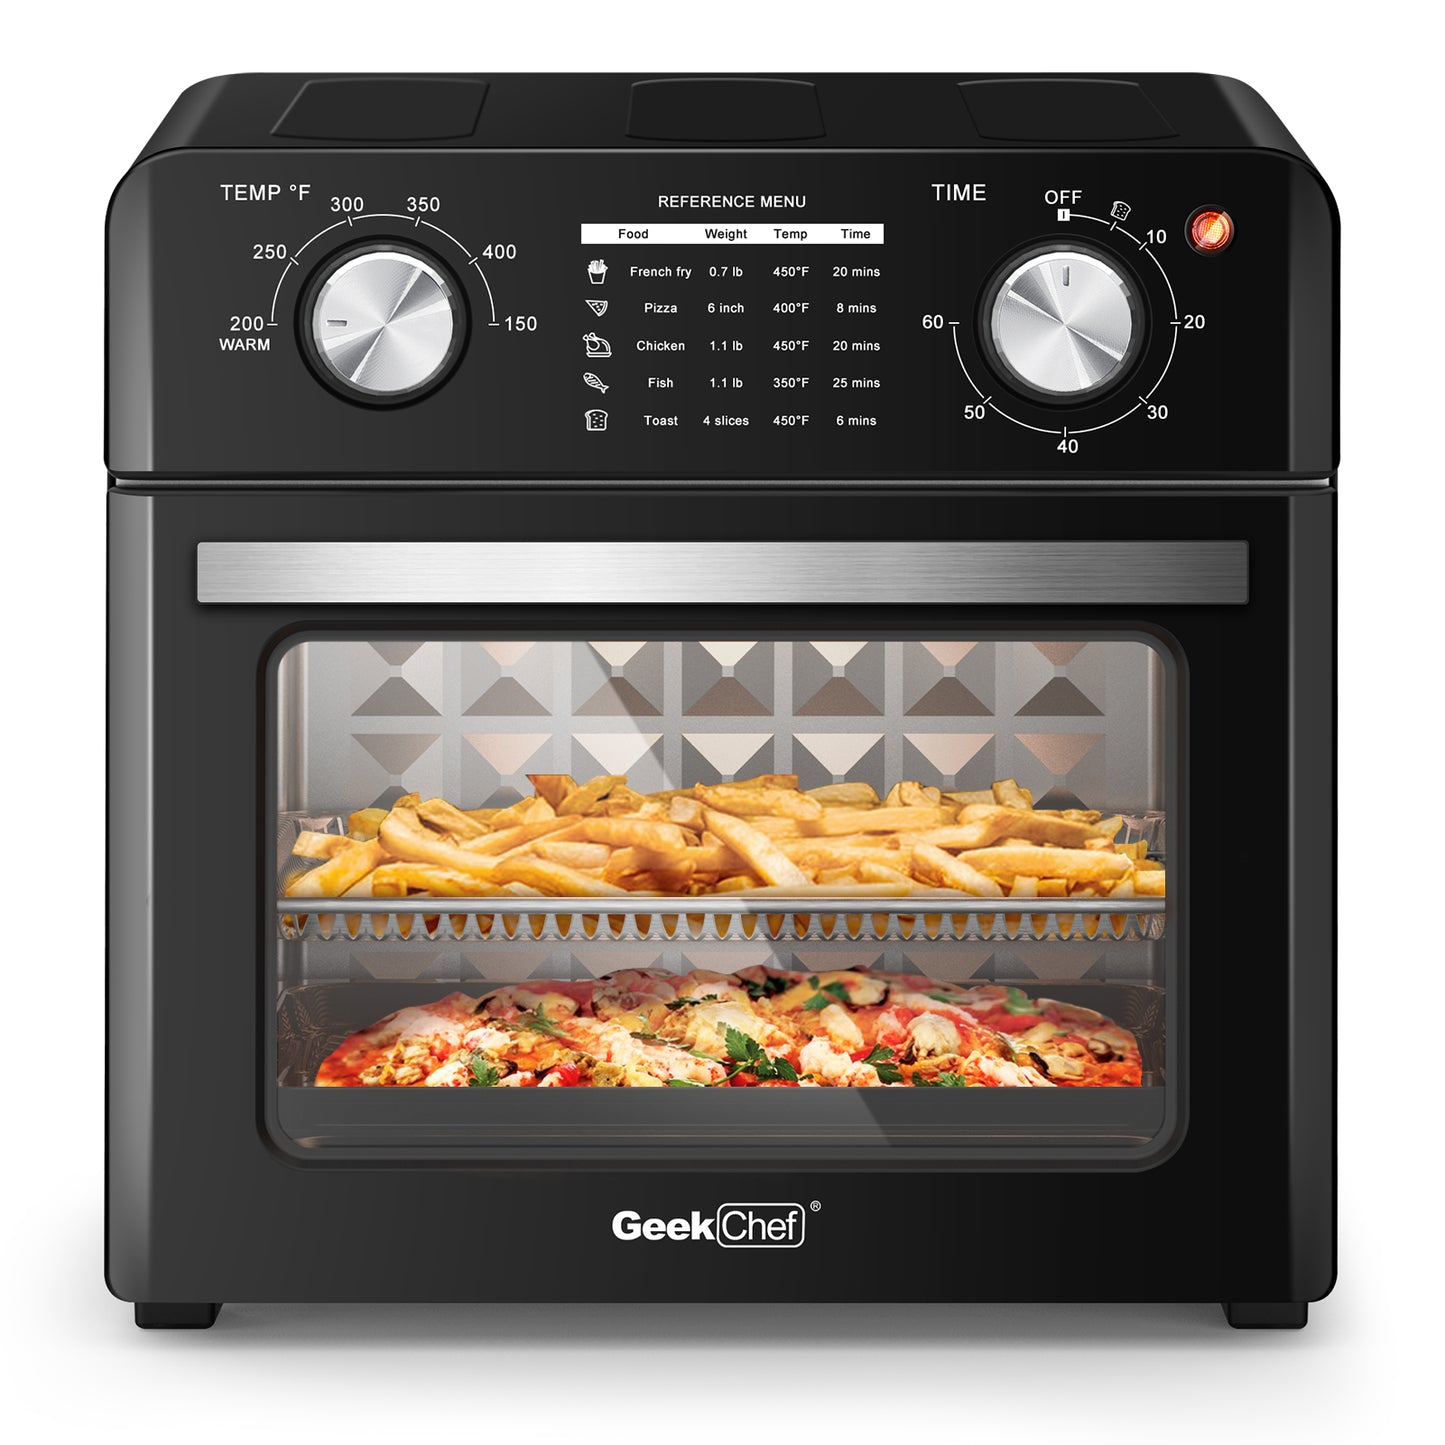 Geek Chef 10 QT Air Fryer Oven - Countertop Toaster Oven with 4-Slice Toaster, Air Fry, Bake - Black Stainless Steel